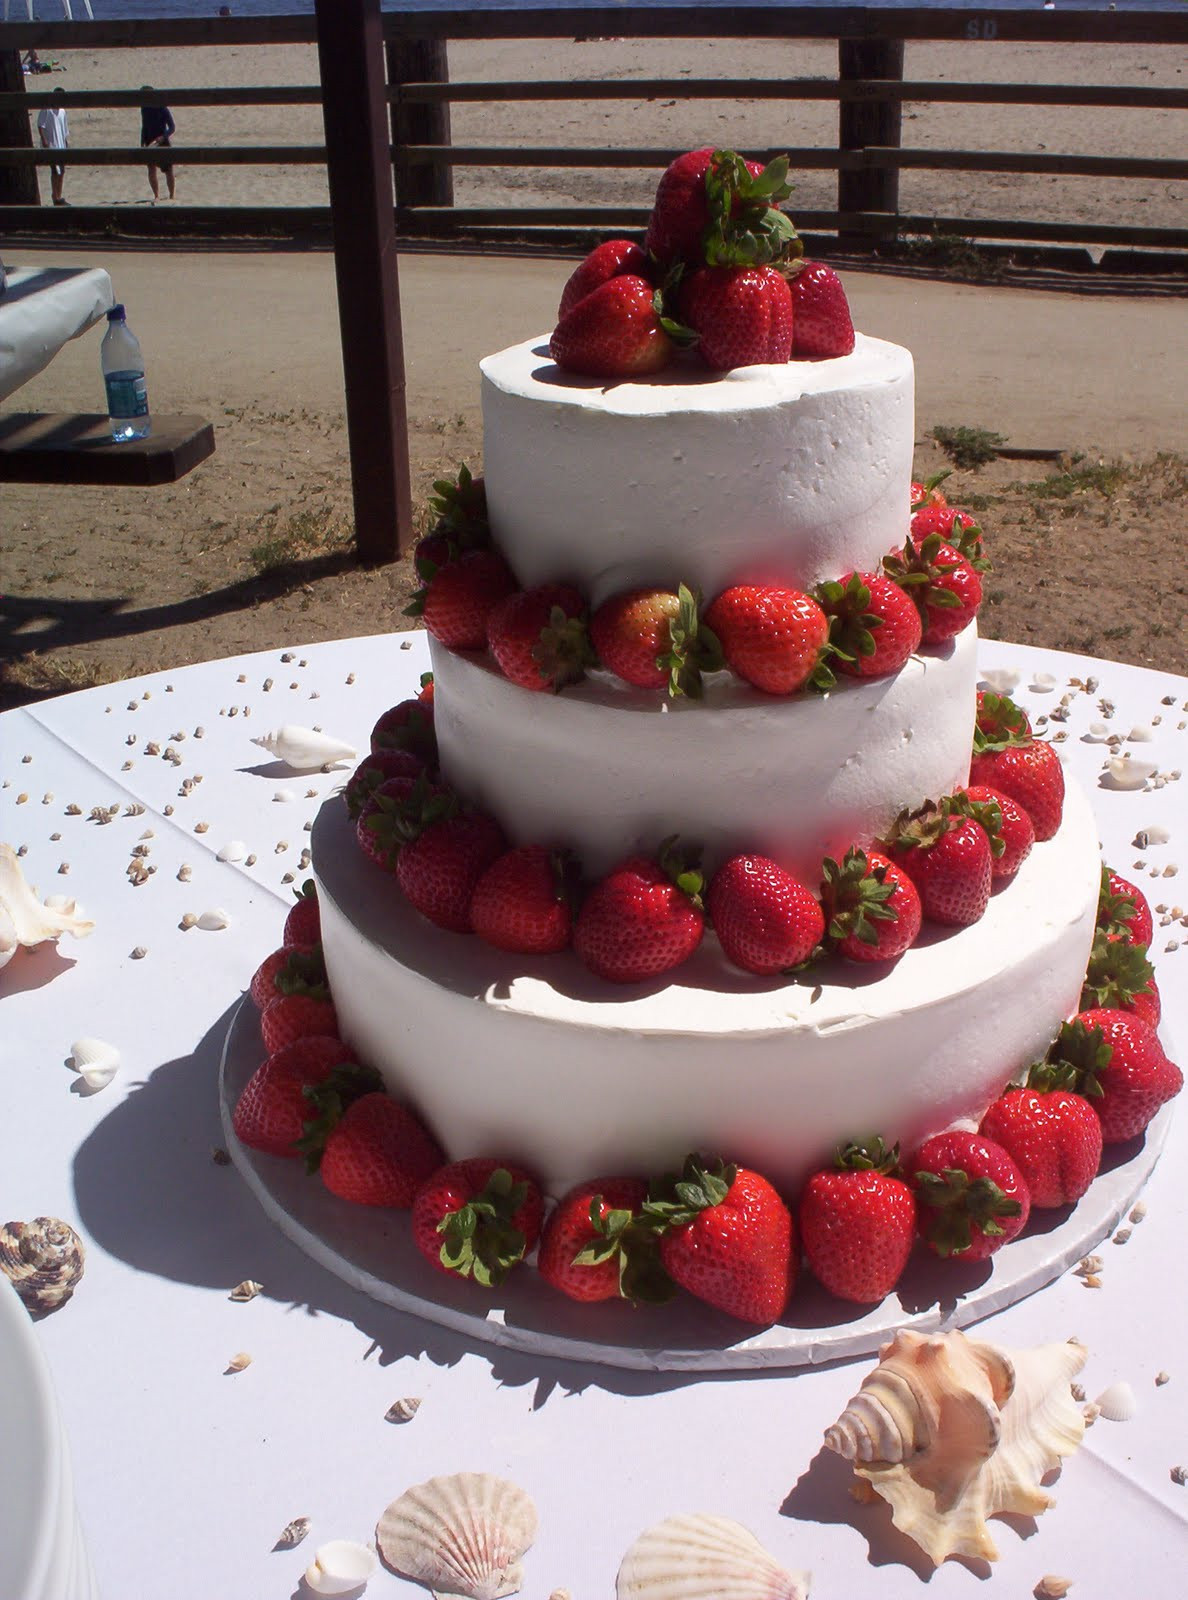 Wedding Cakes with Strawberries 20 Of the Best Ideas for Wedding Cakes White Wedding Cakes with Chocolate